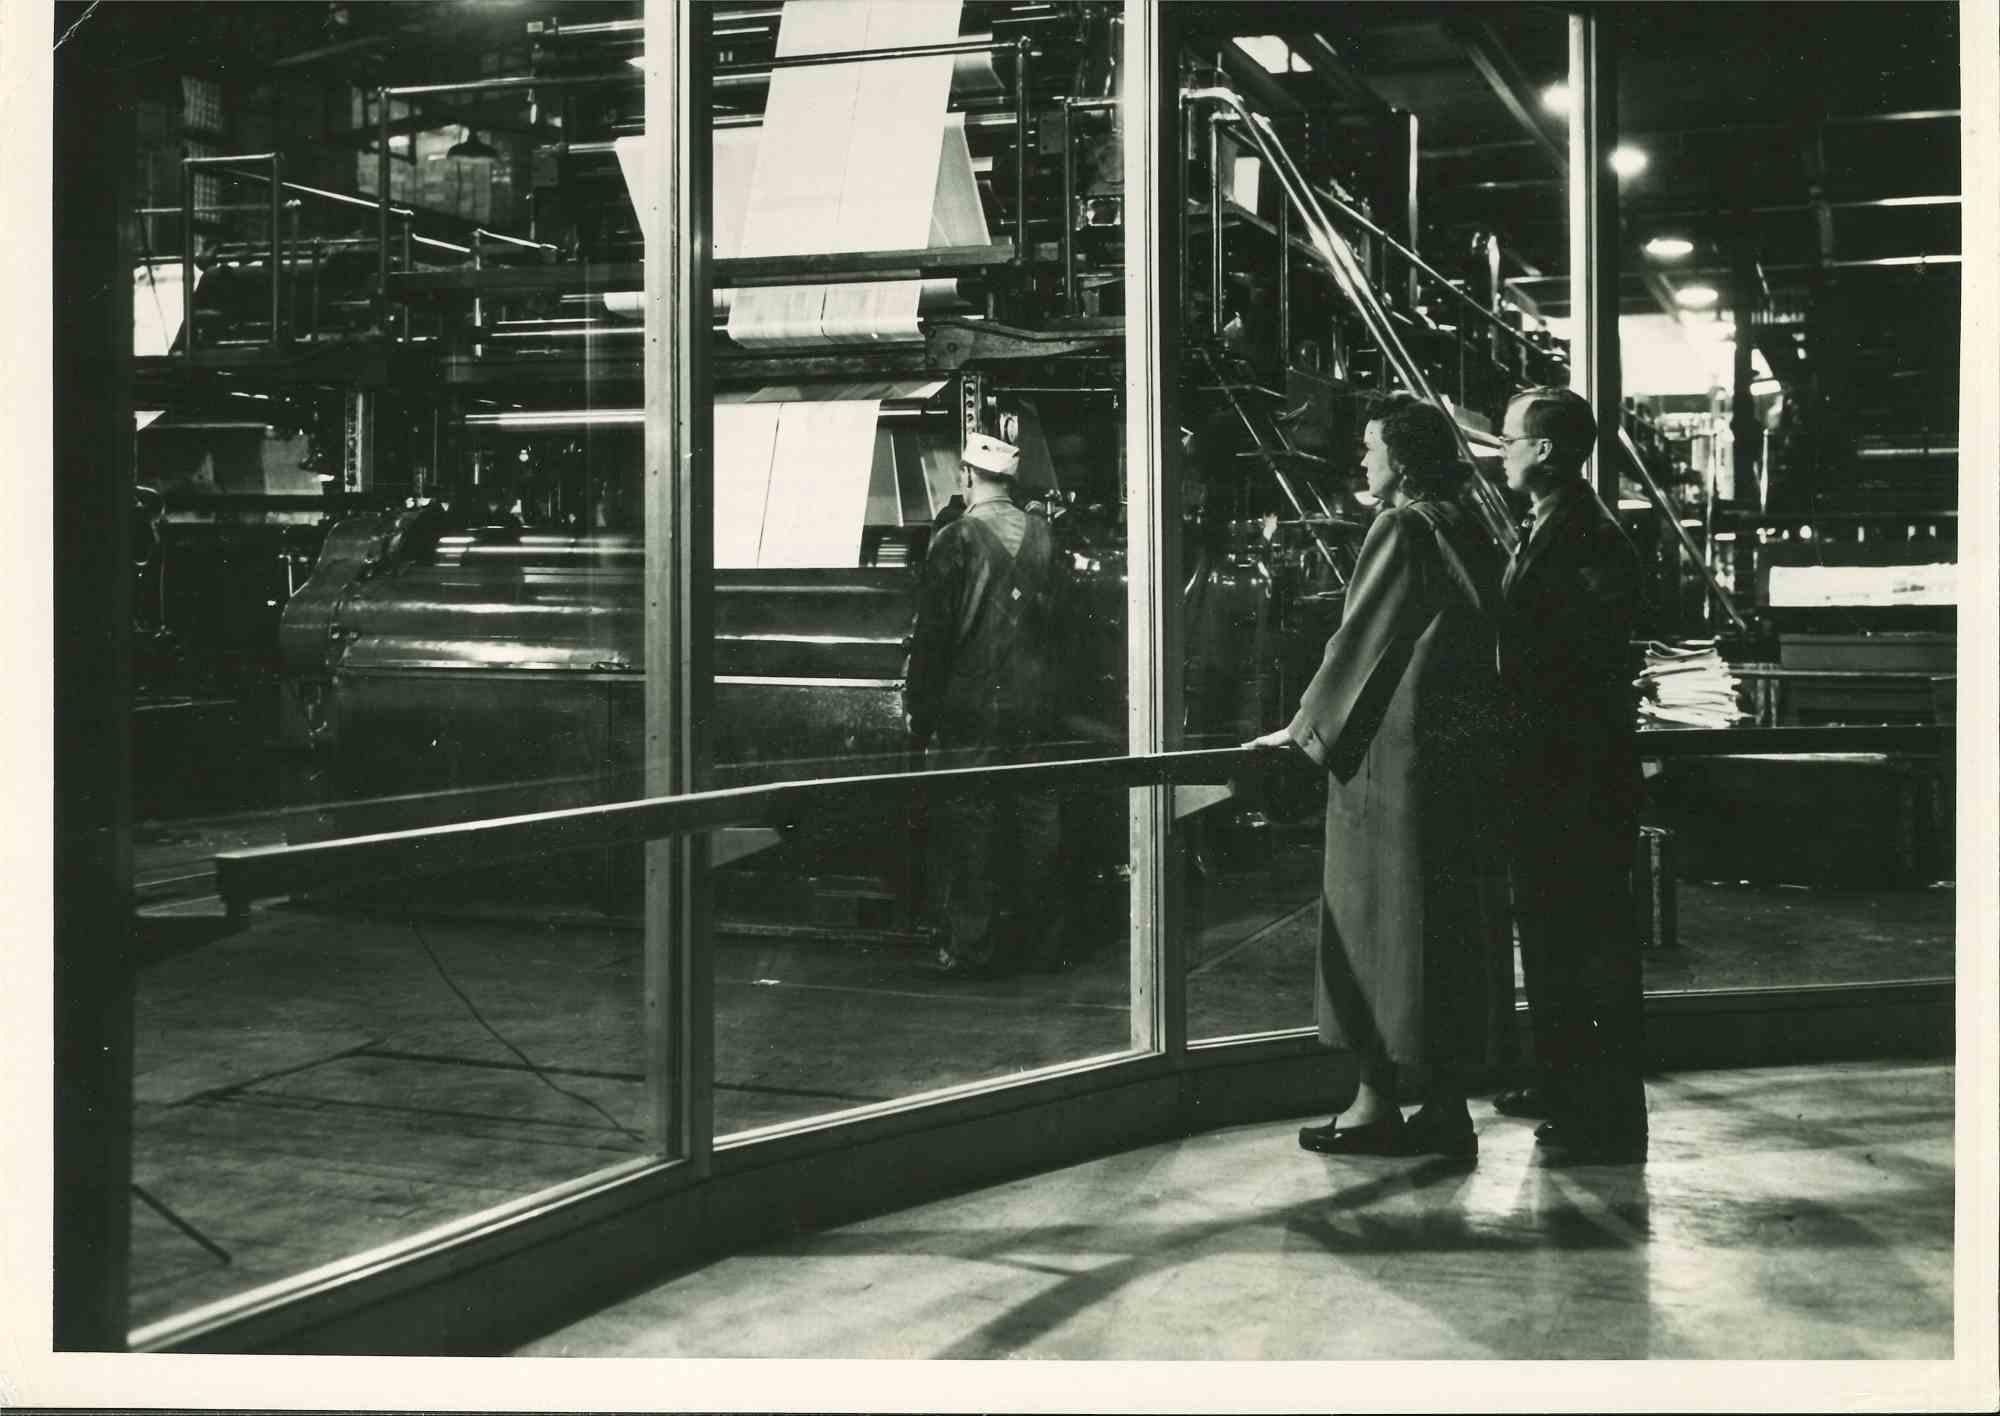 Unknown Figurative Photograph - Presses in Operation - Vintage Photograph - Mid 20th Century